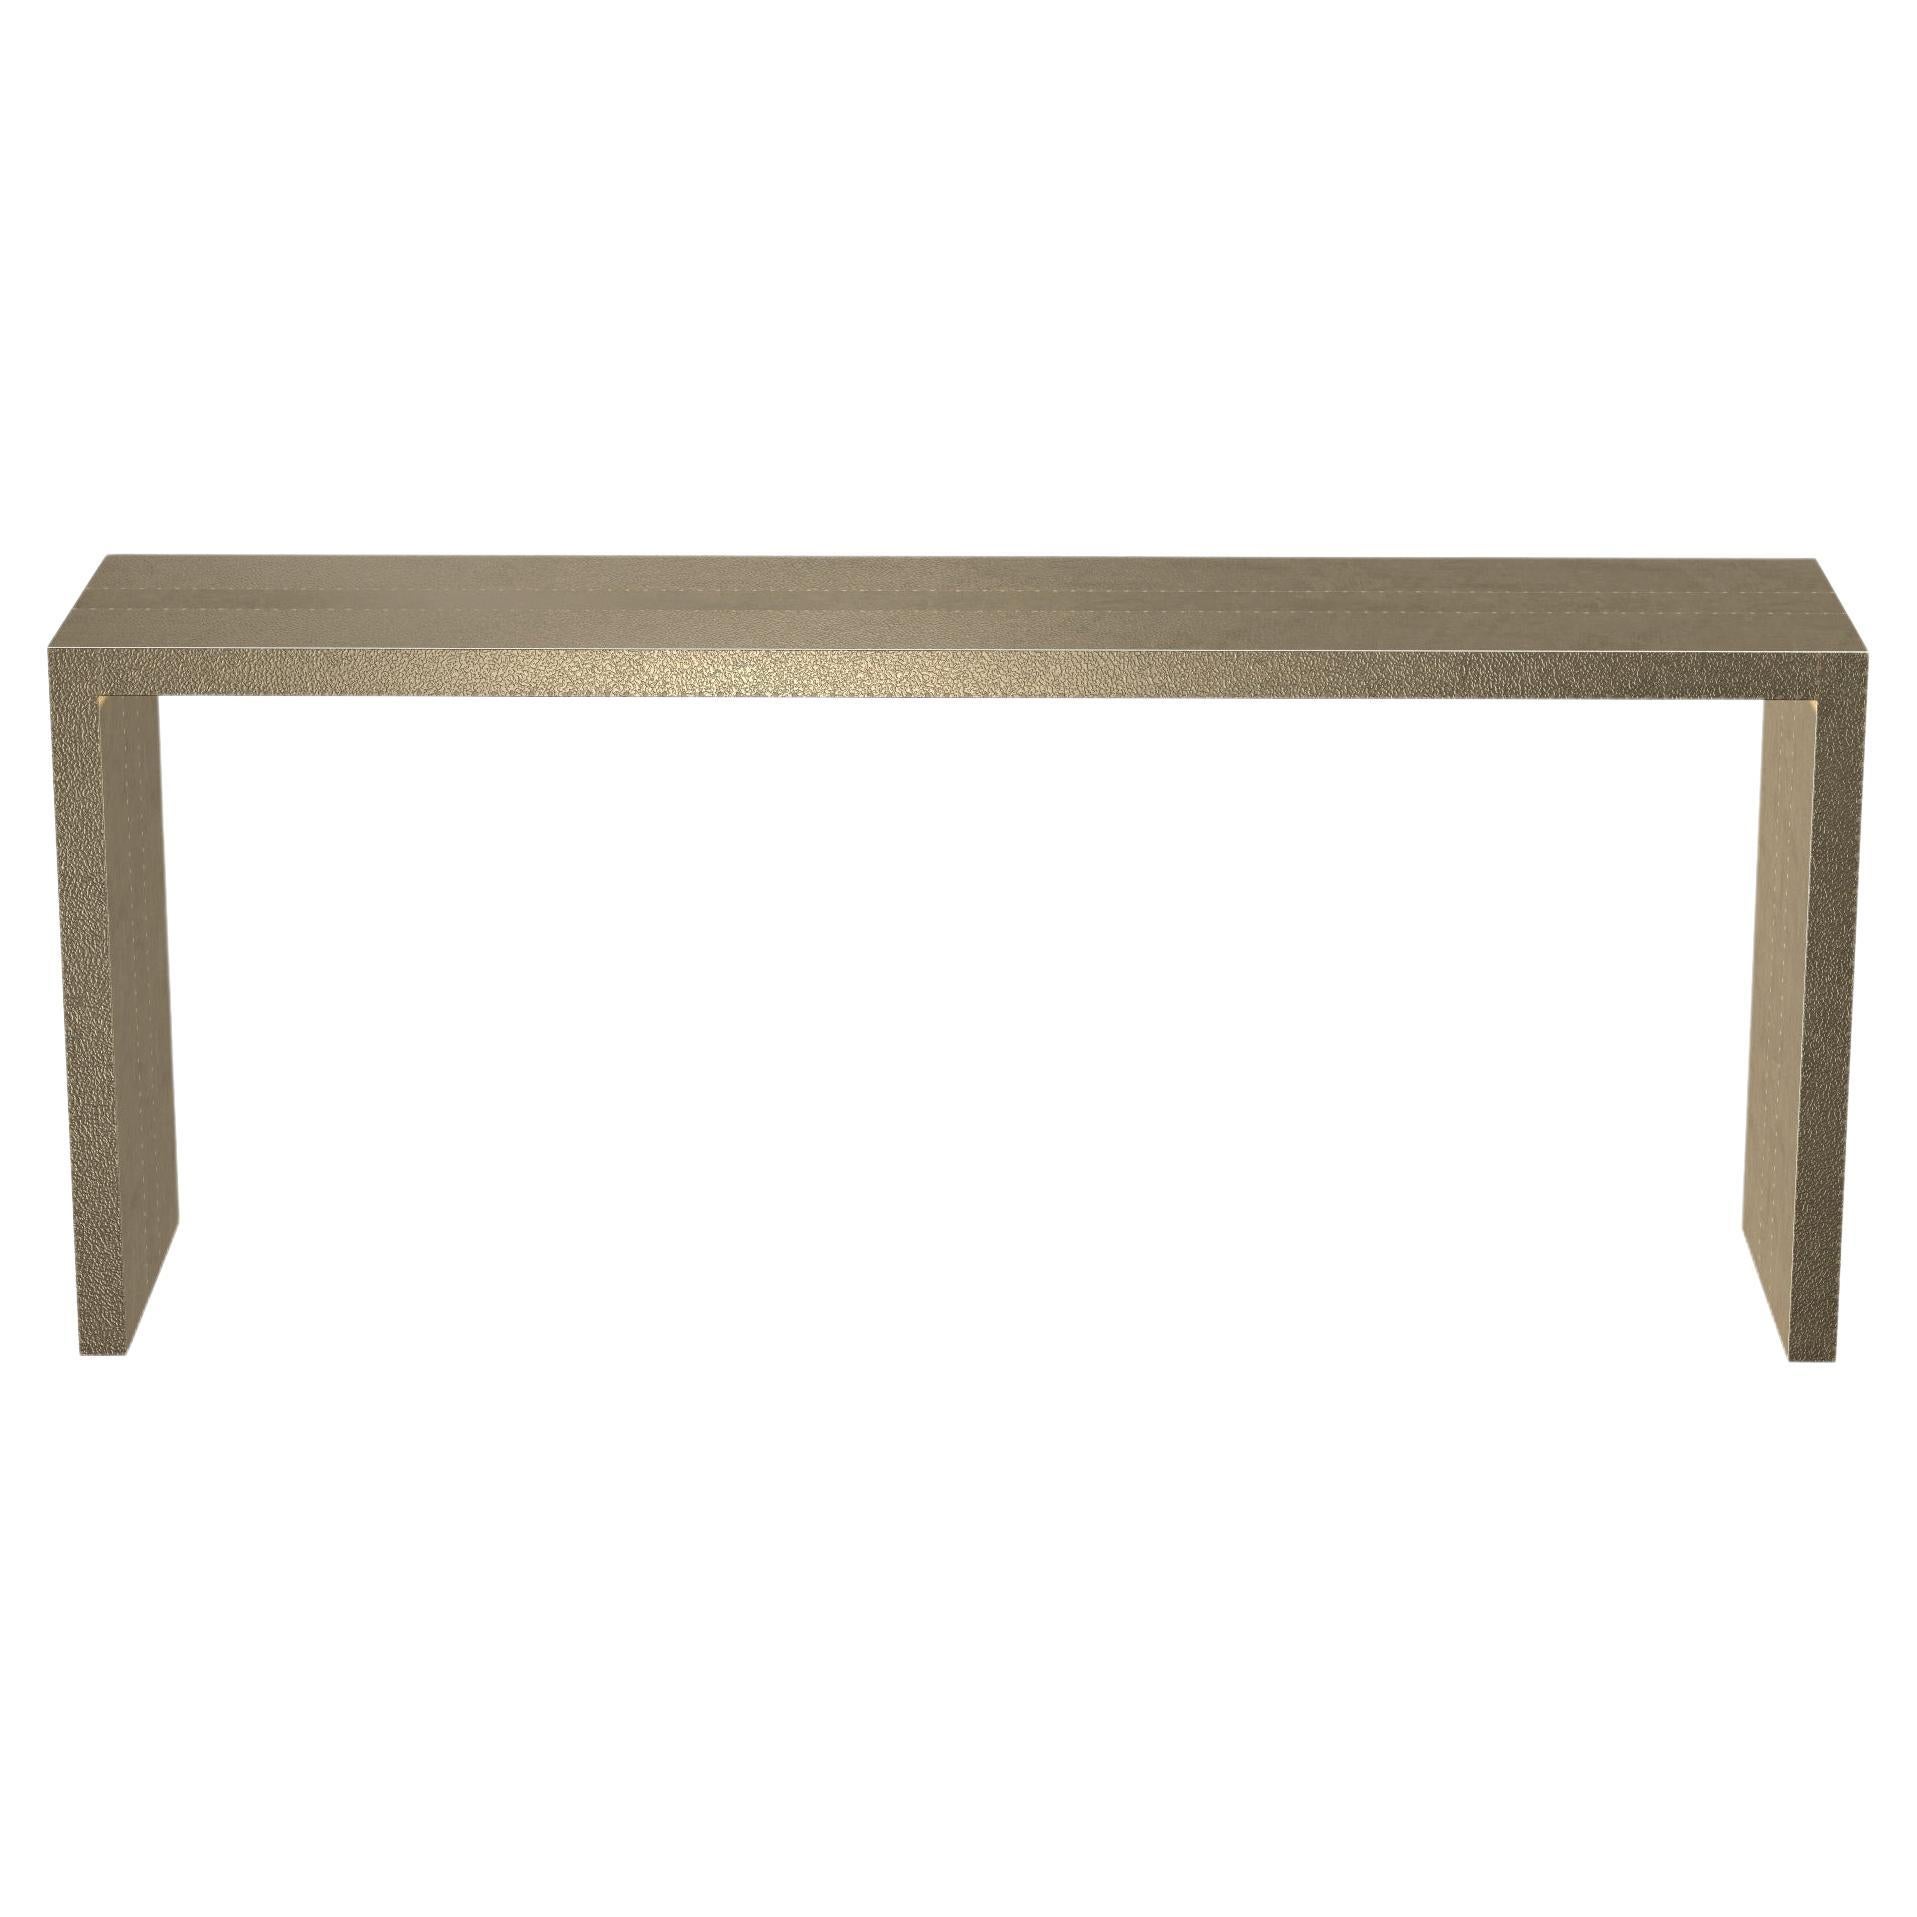 Art Deco Conference Tables Rectangular Console in Fine Hammered Brass by Alison 